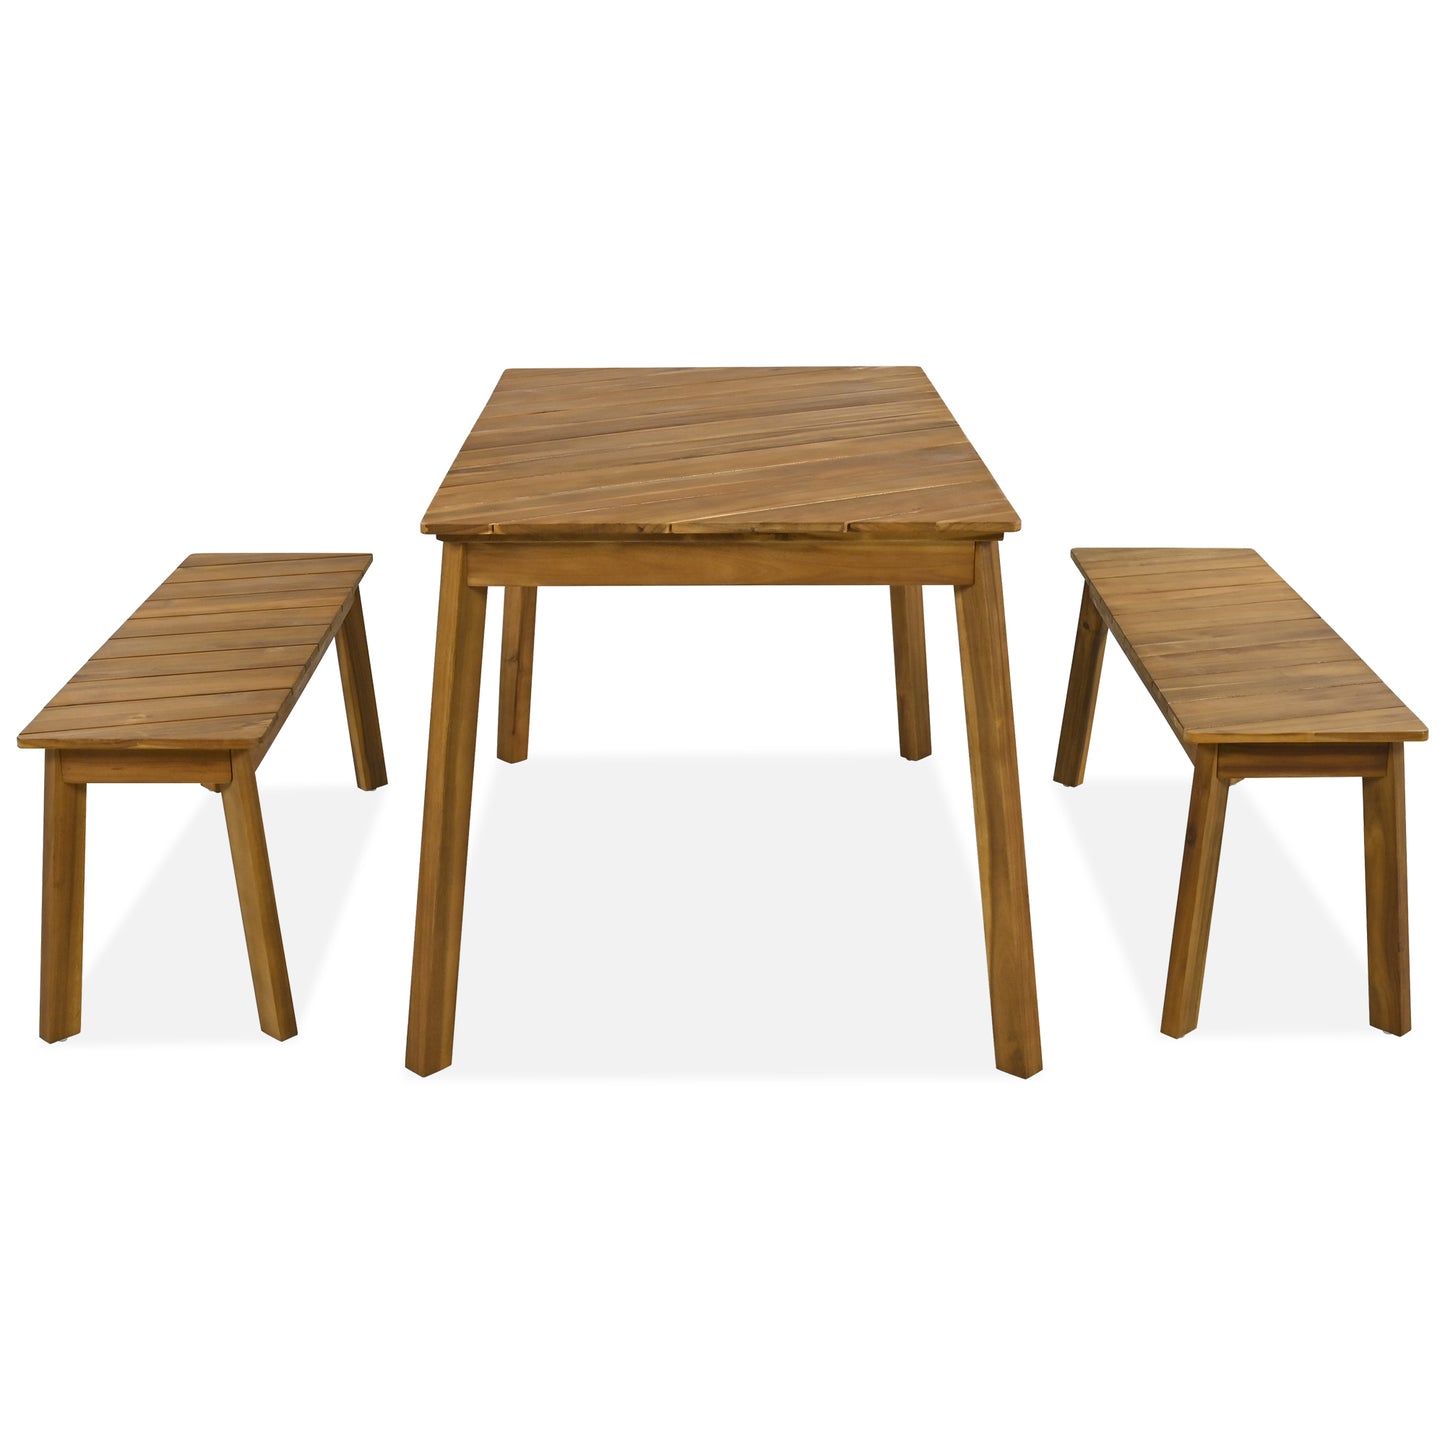 3 Pieces Acacia Wood Table Bench Dining Set - Ukerr Home